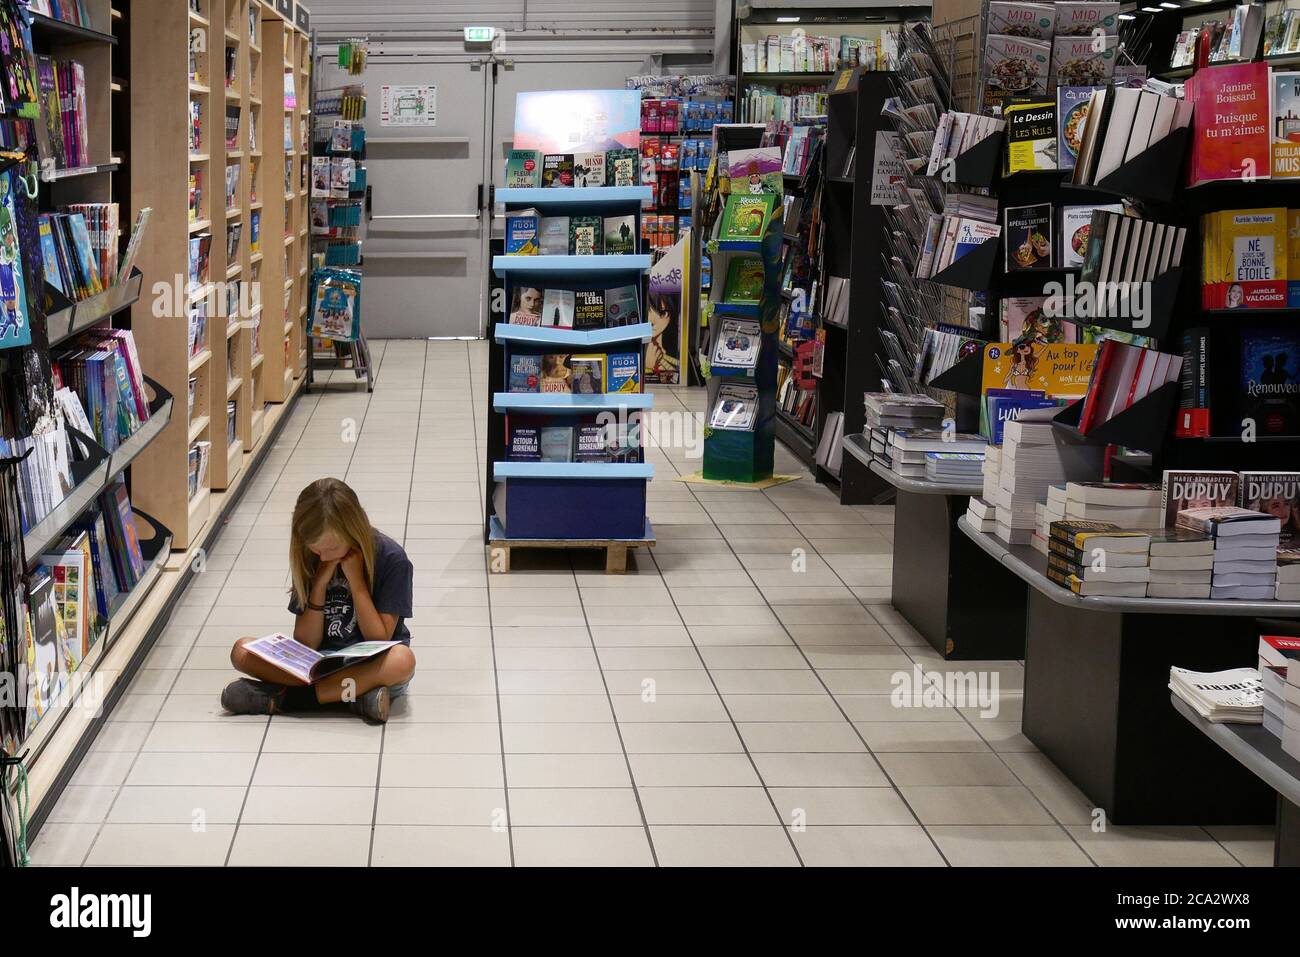 A young girl is fascinated by a book and reads it on the floor of a supermarket Stock Photo